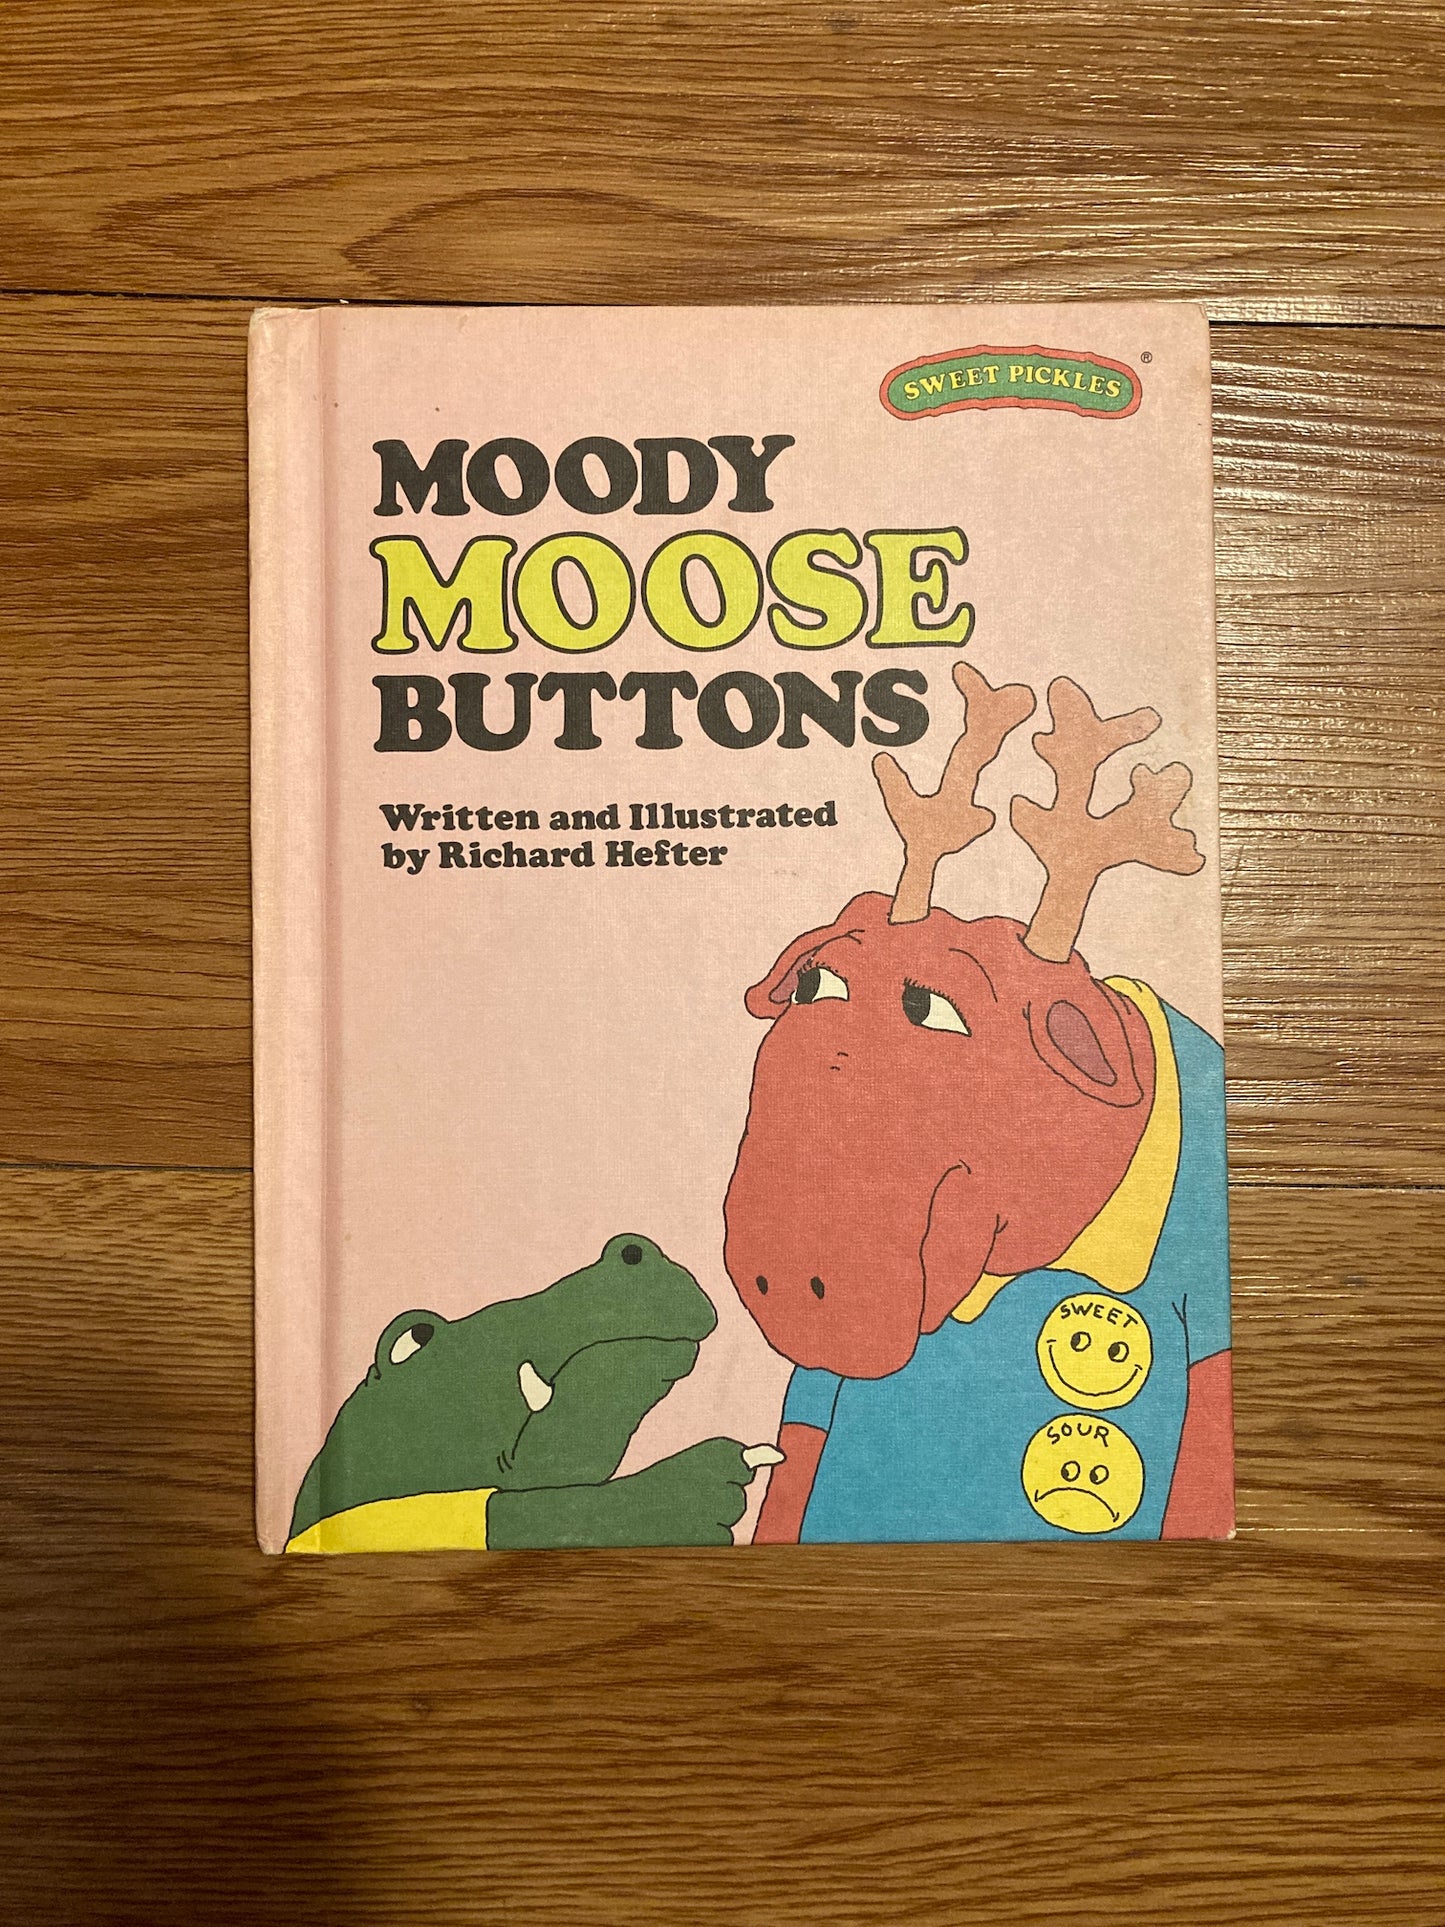 Moody Moose Buttons (Sweet Pickles Series), Very Good!